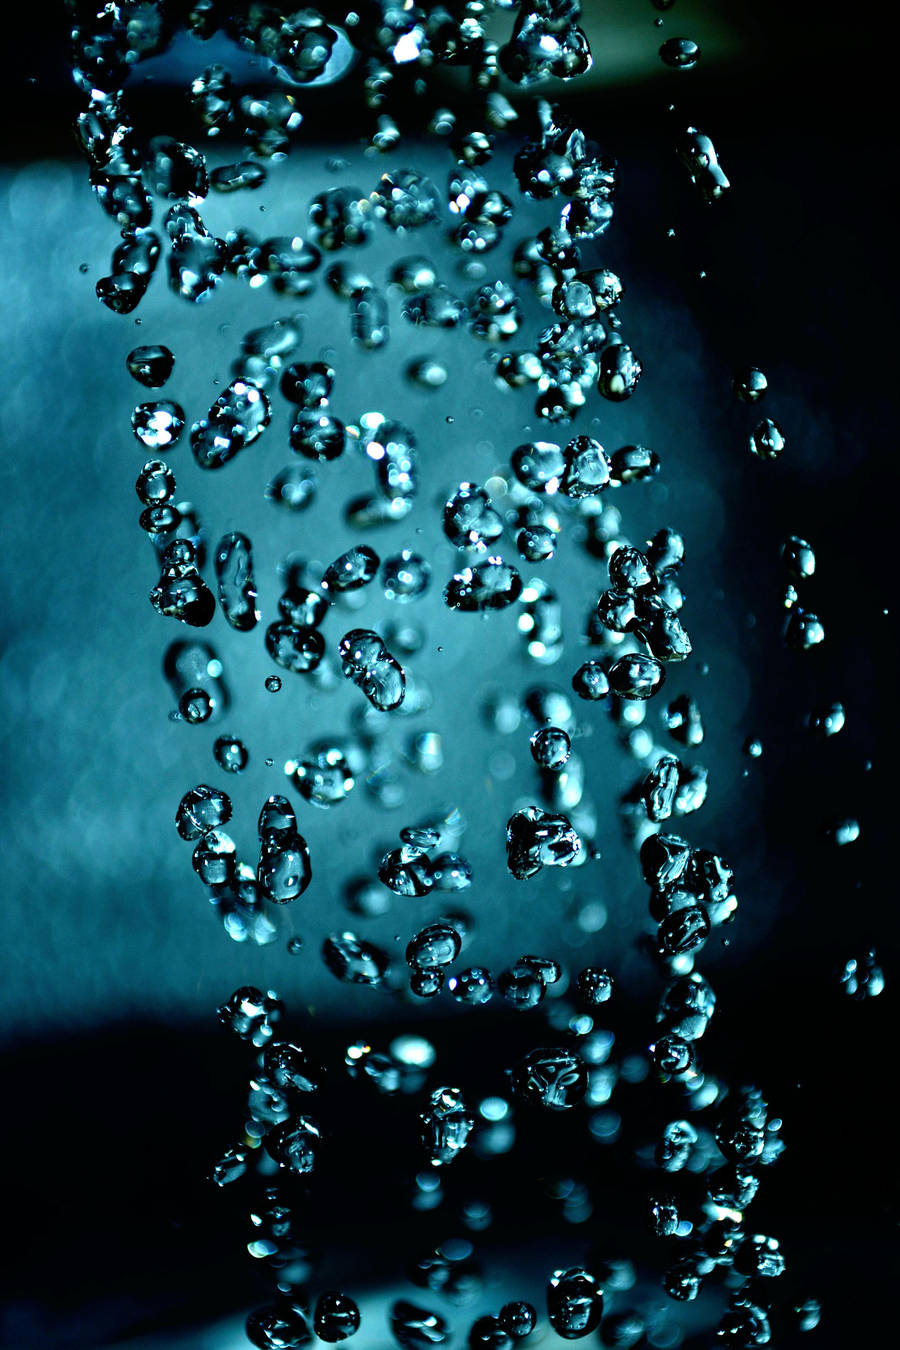 Water I by Jack-the-drunk on DeviantArt